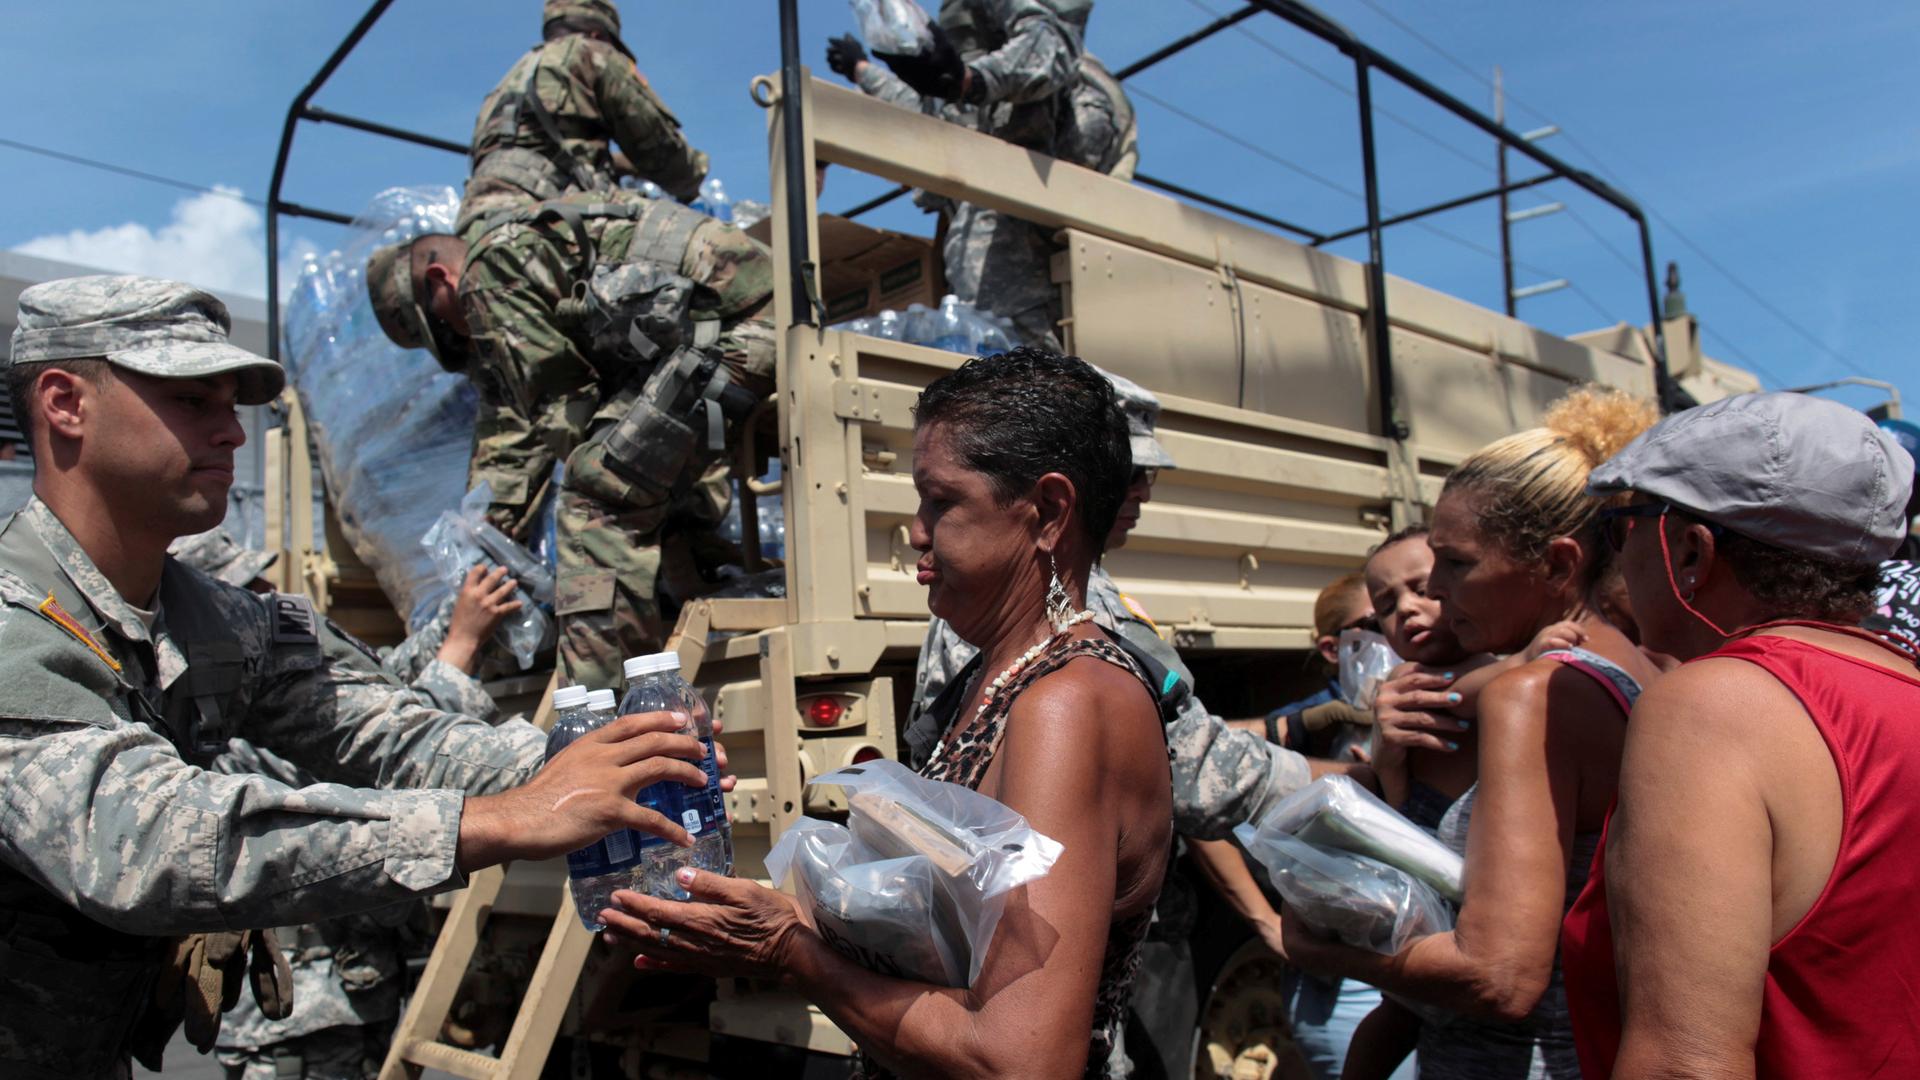 Soldiers of Puerto Rico's national guard distribute relief items to people, Sept. 24, 2017, after the area was hit by Hurricane Maria in San Juan, Puerto Rico.